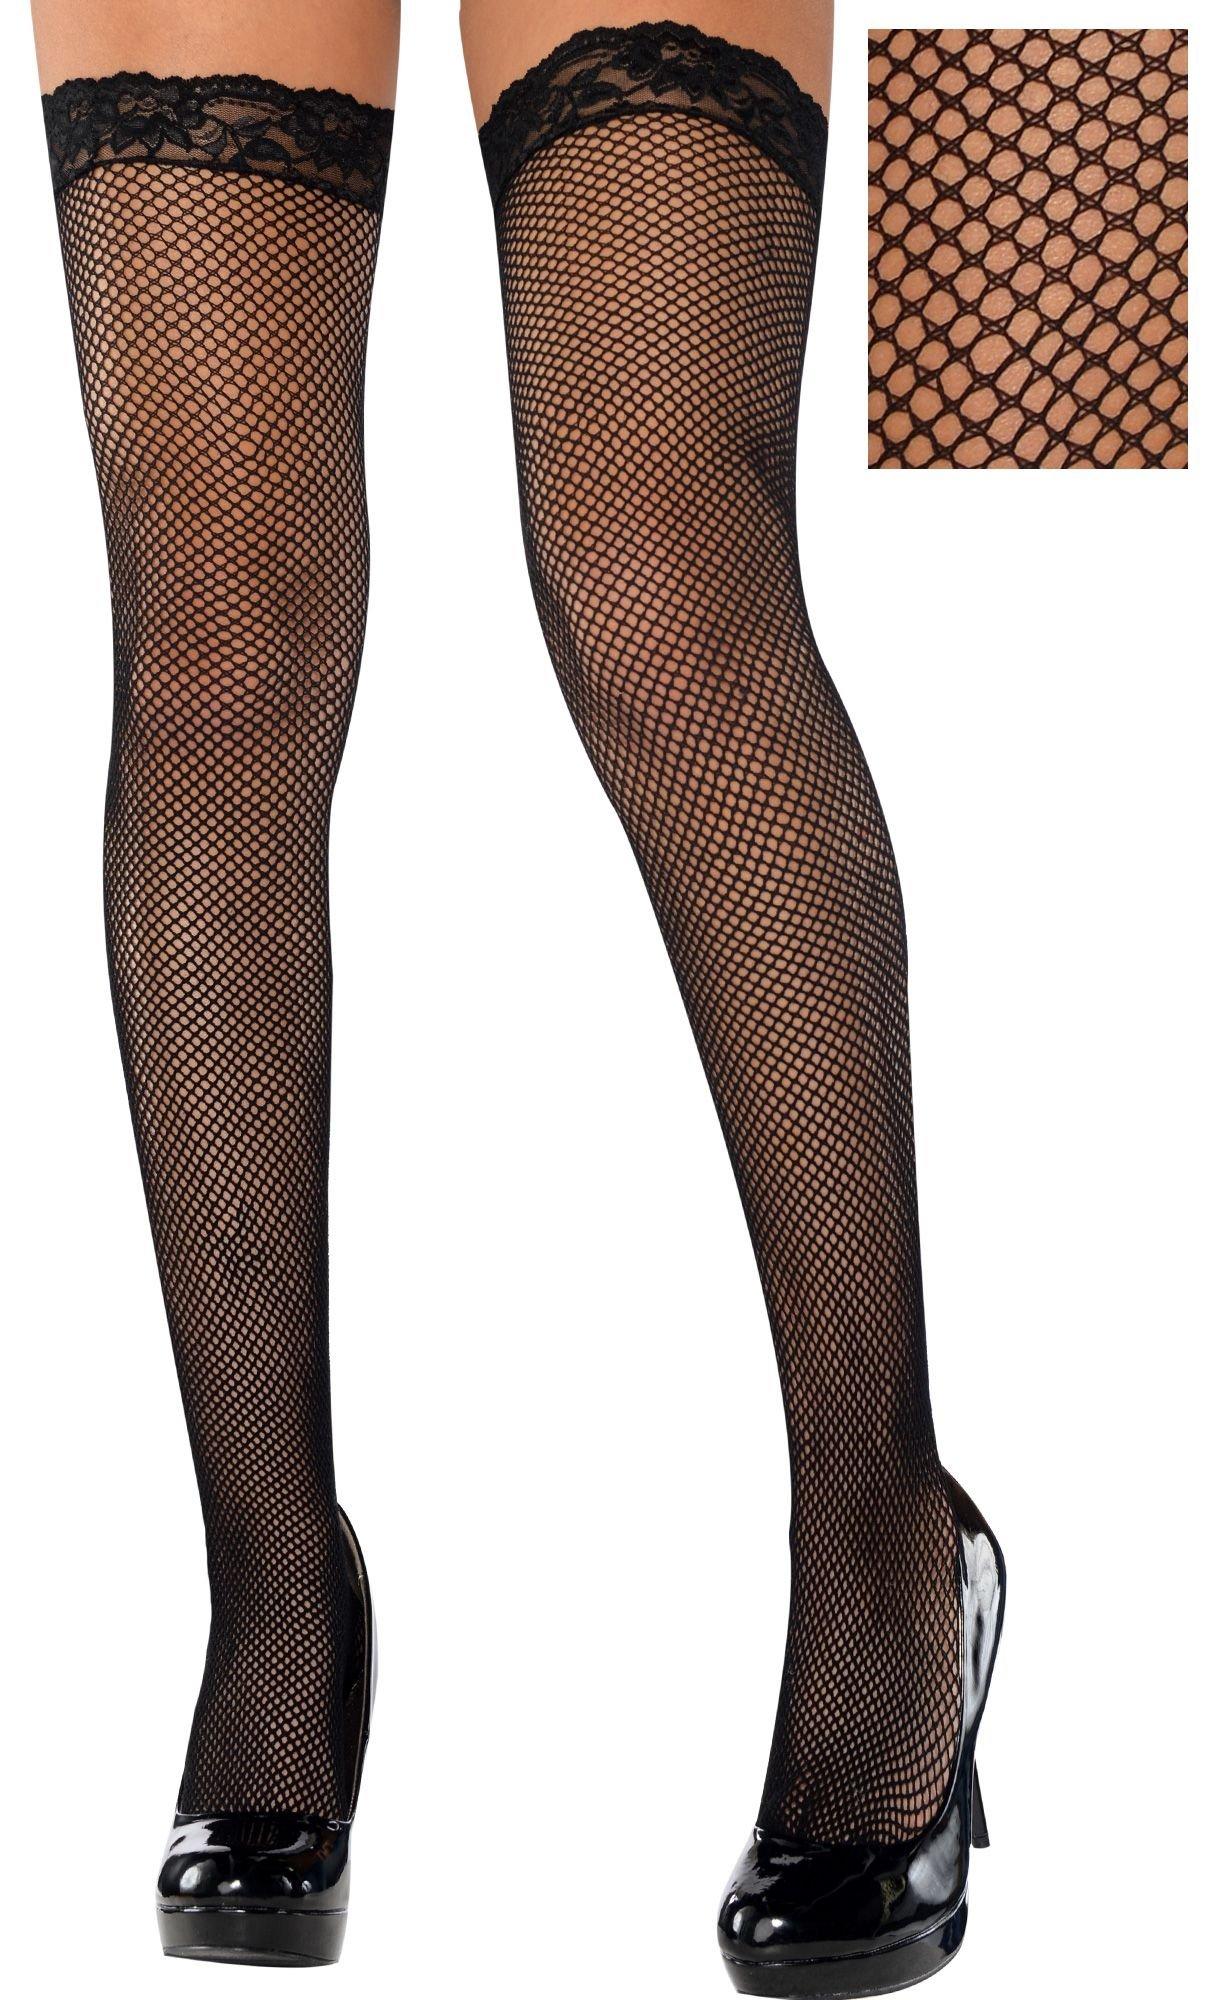 Adult Black Fishnet Thigh-High Stockings with Lace Top